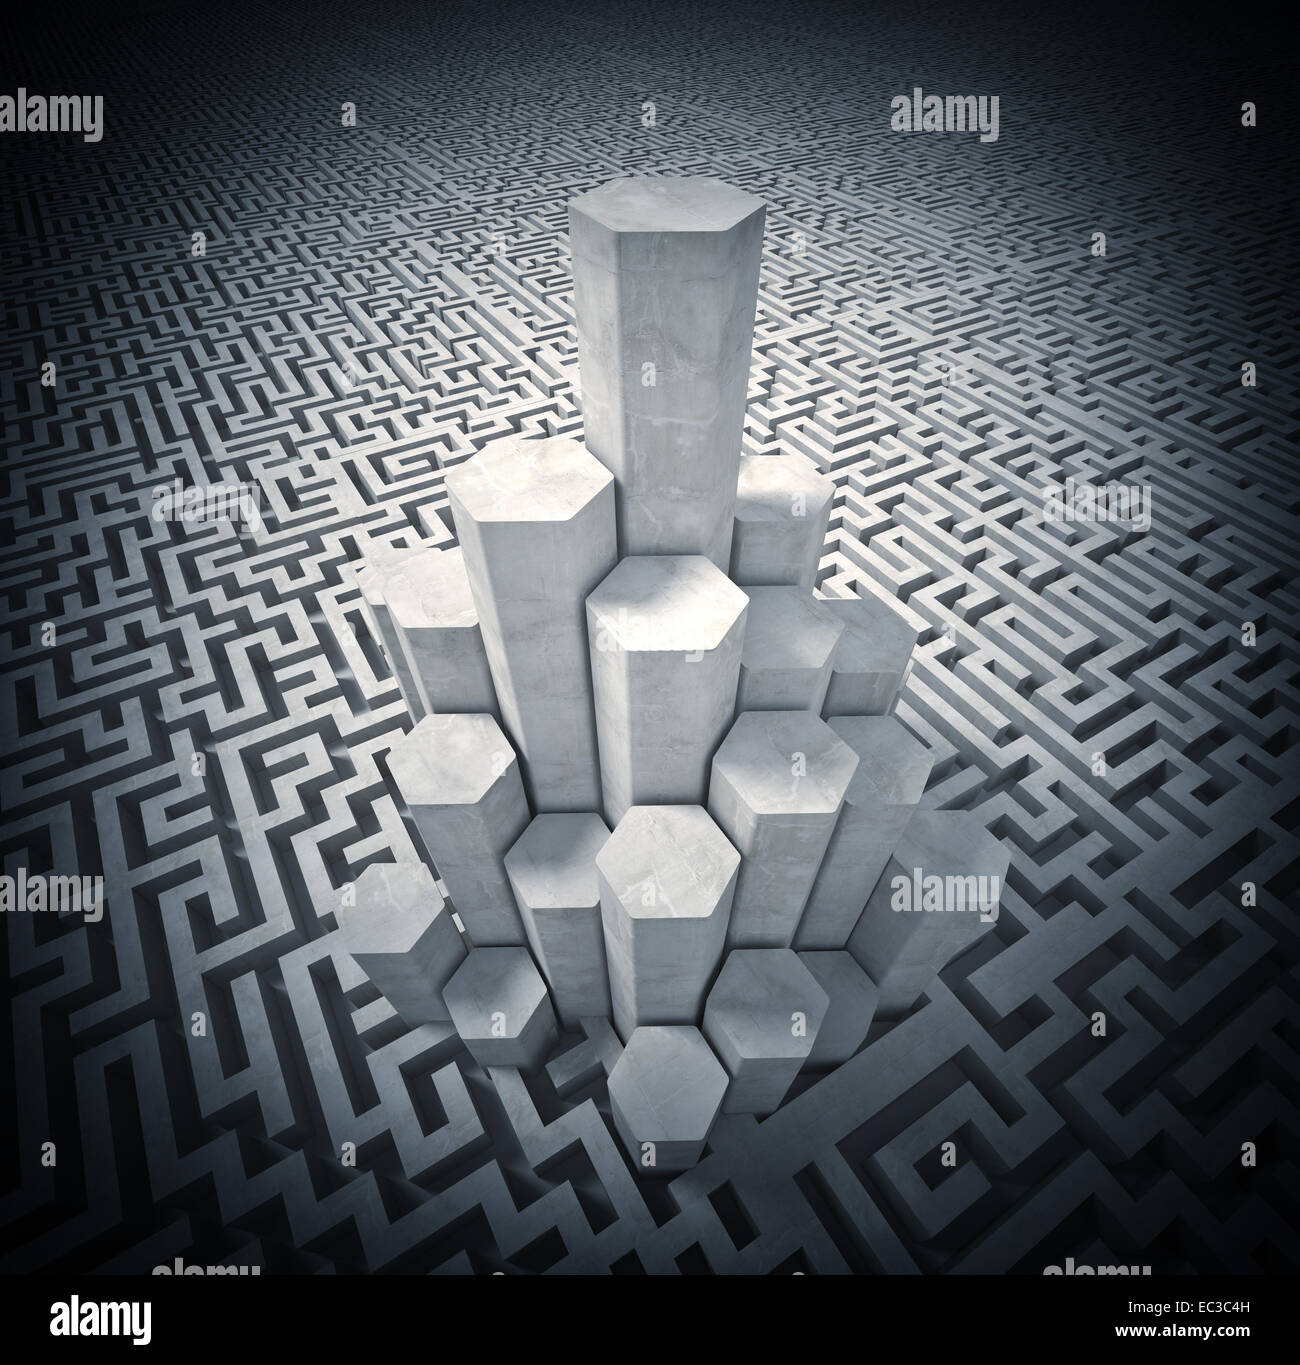 3d image of tall tower and maze Stock Photo